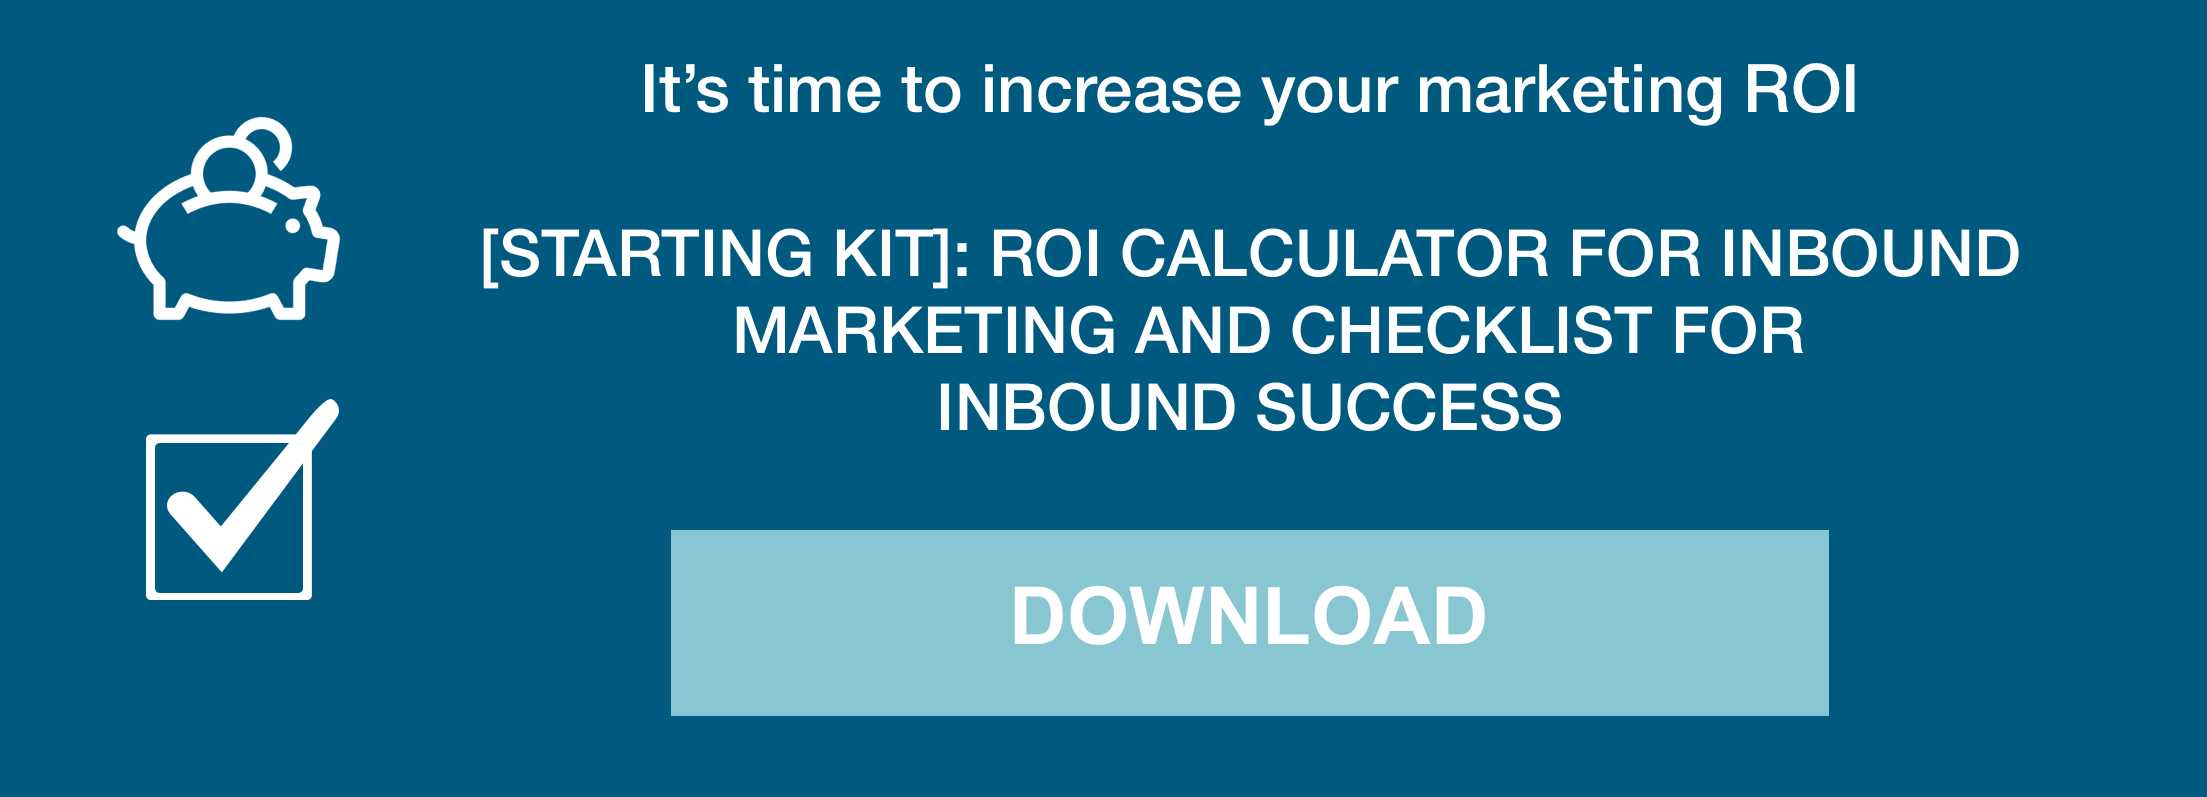 One of our CTAs that leads to a landing page for the ROI calculator and checklist for (inbound) marketing success